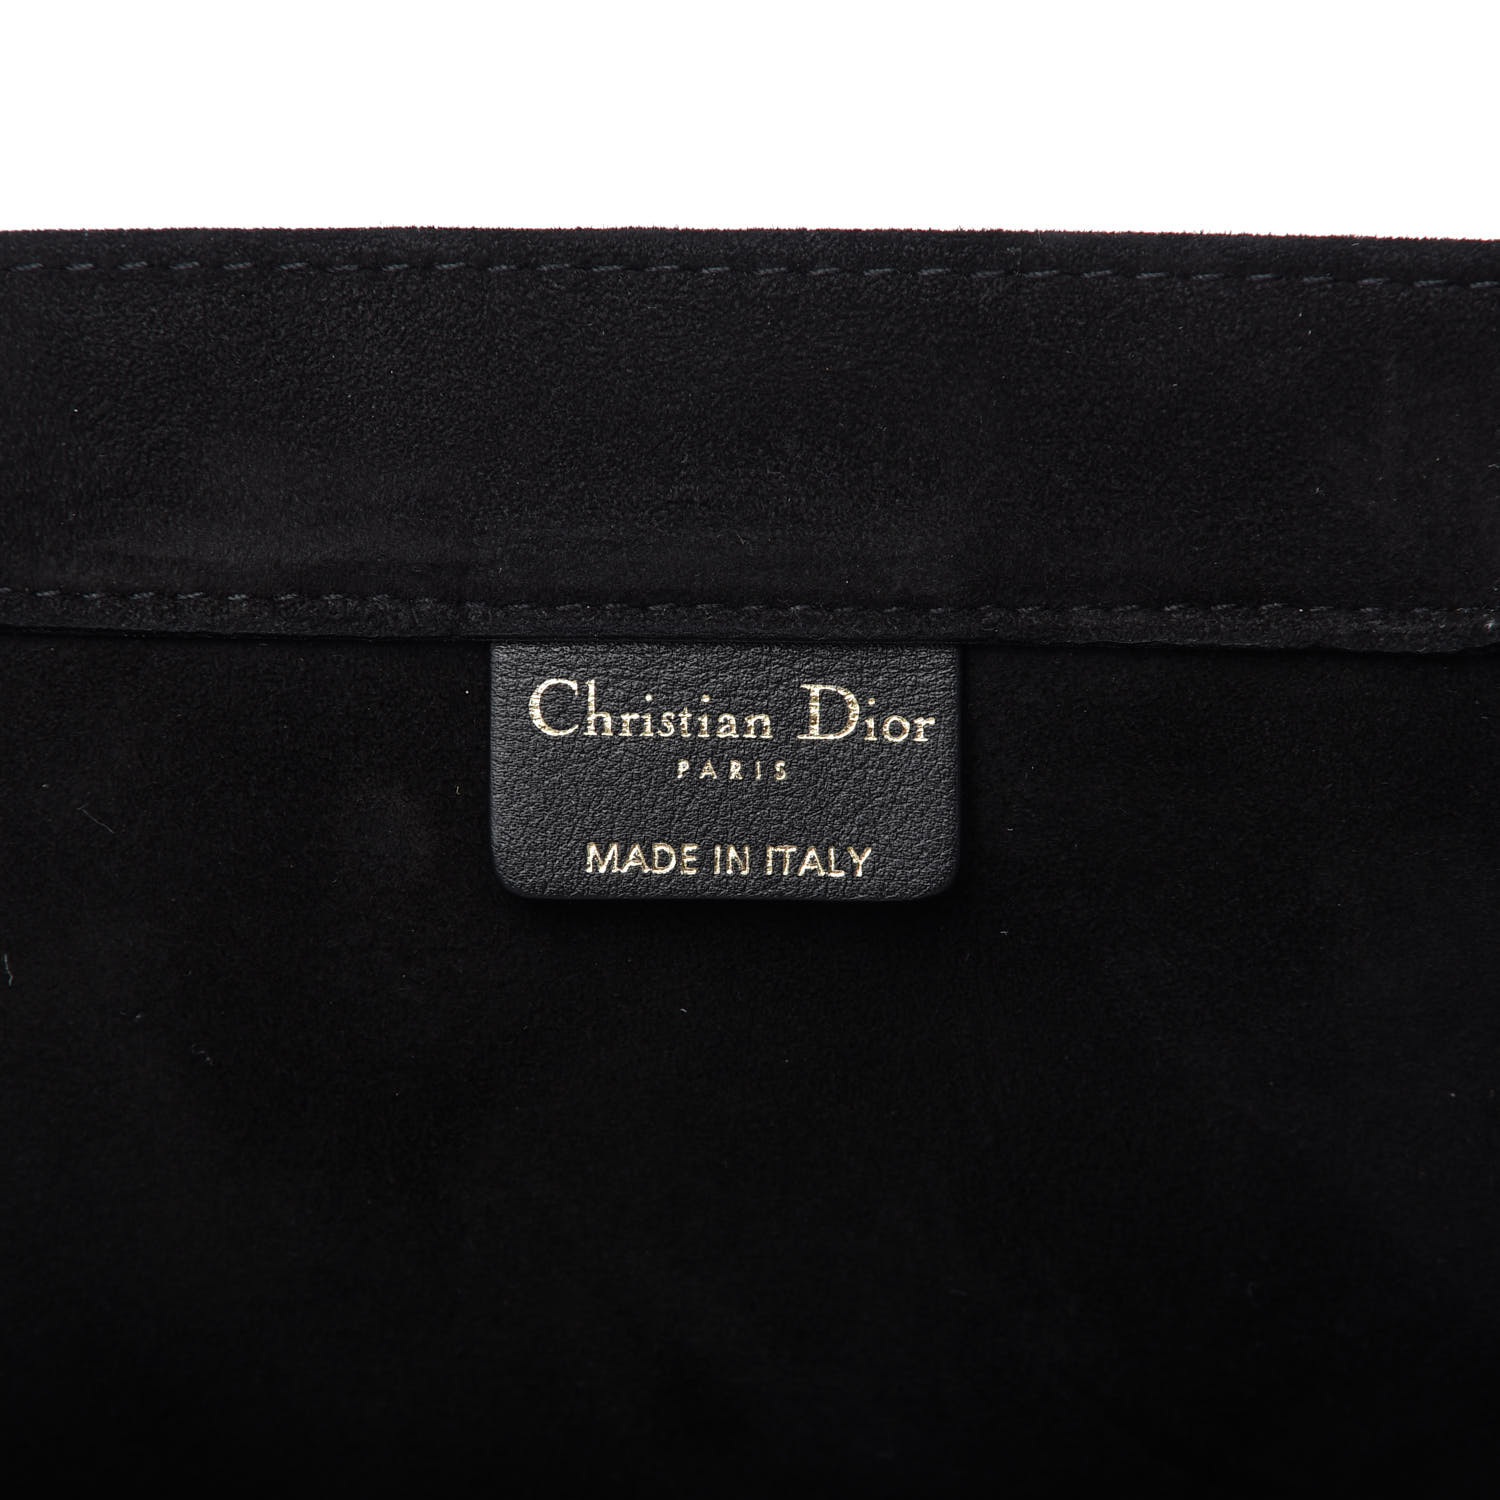 CHRISTIAN DIOR Suede Floral Hand Painted Book Tote Black 764855 